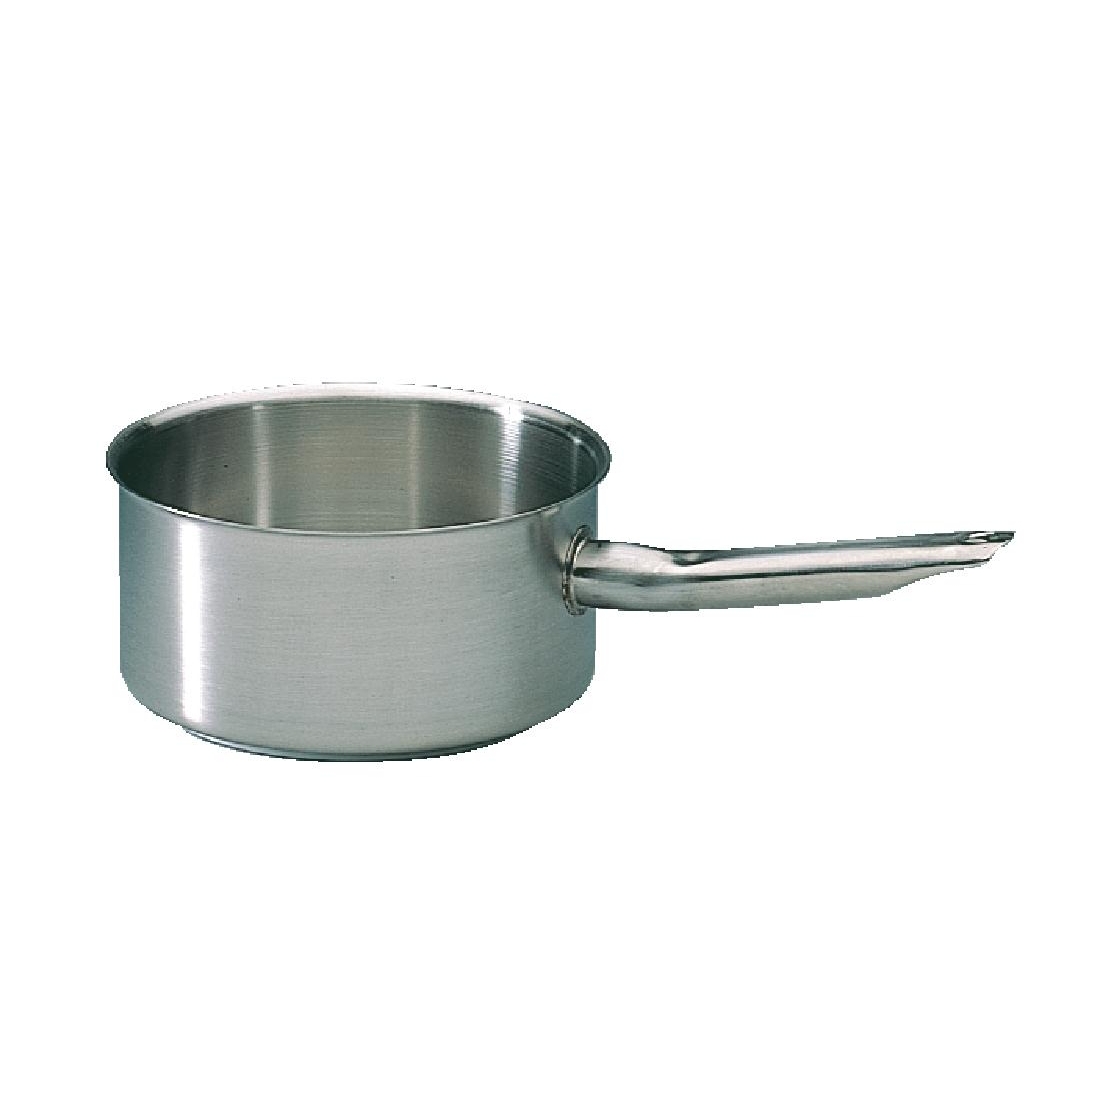 Bourgeat Stainless Steel Excellence Saucepan 5.4Ltr